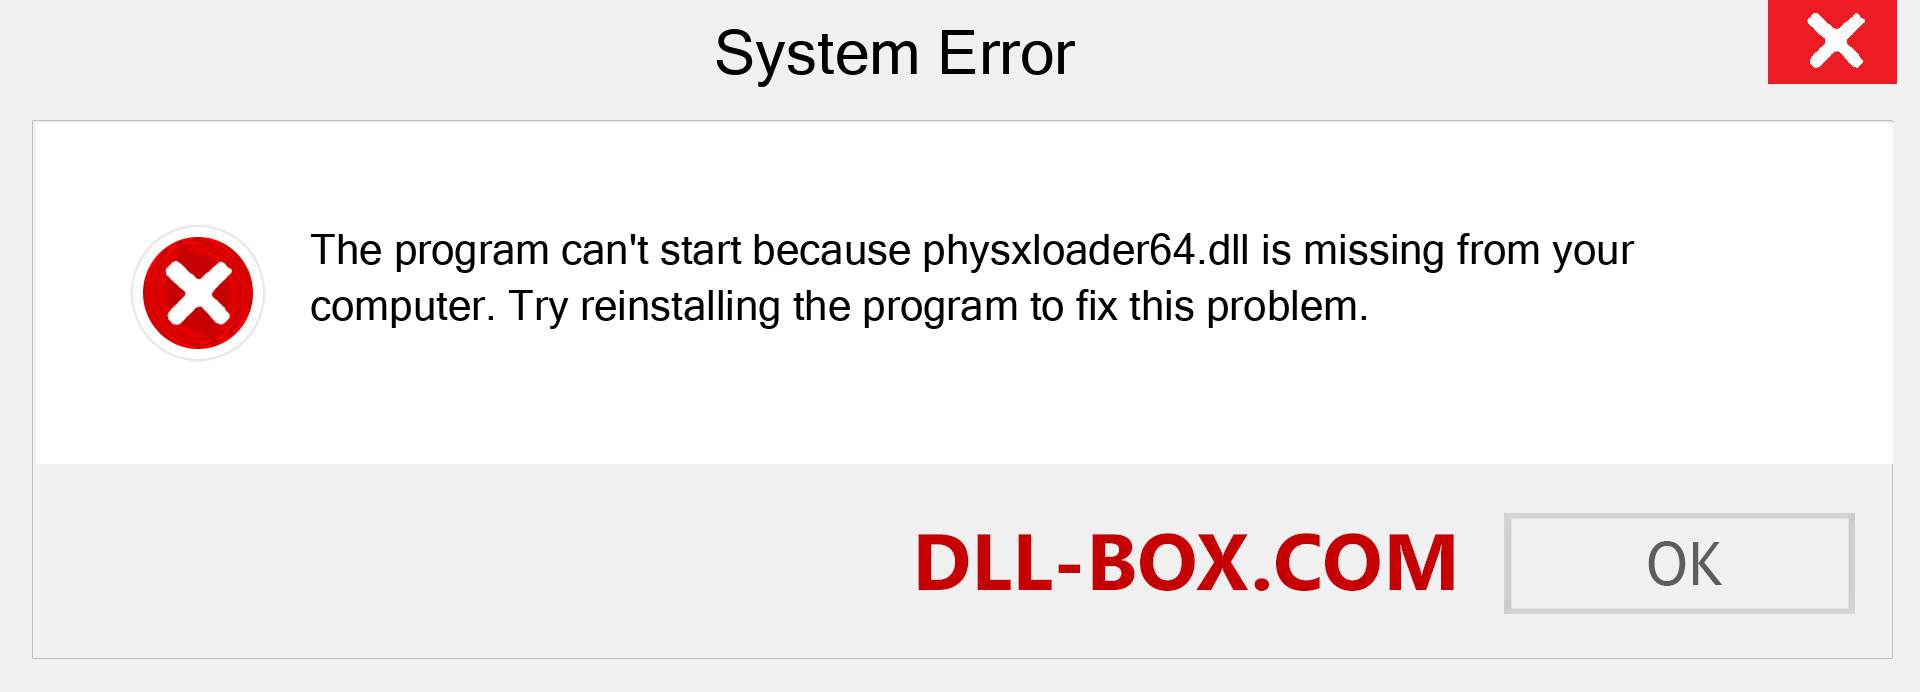  physxloader64.dll file is missing?. Download for Windows 7, 8, 10 - Fix  physxloader64 dll Missing Error on Windows, photos, images